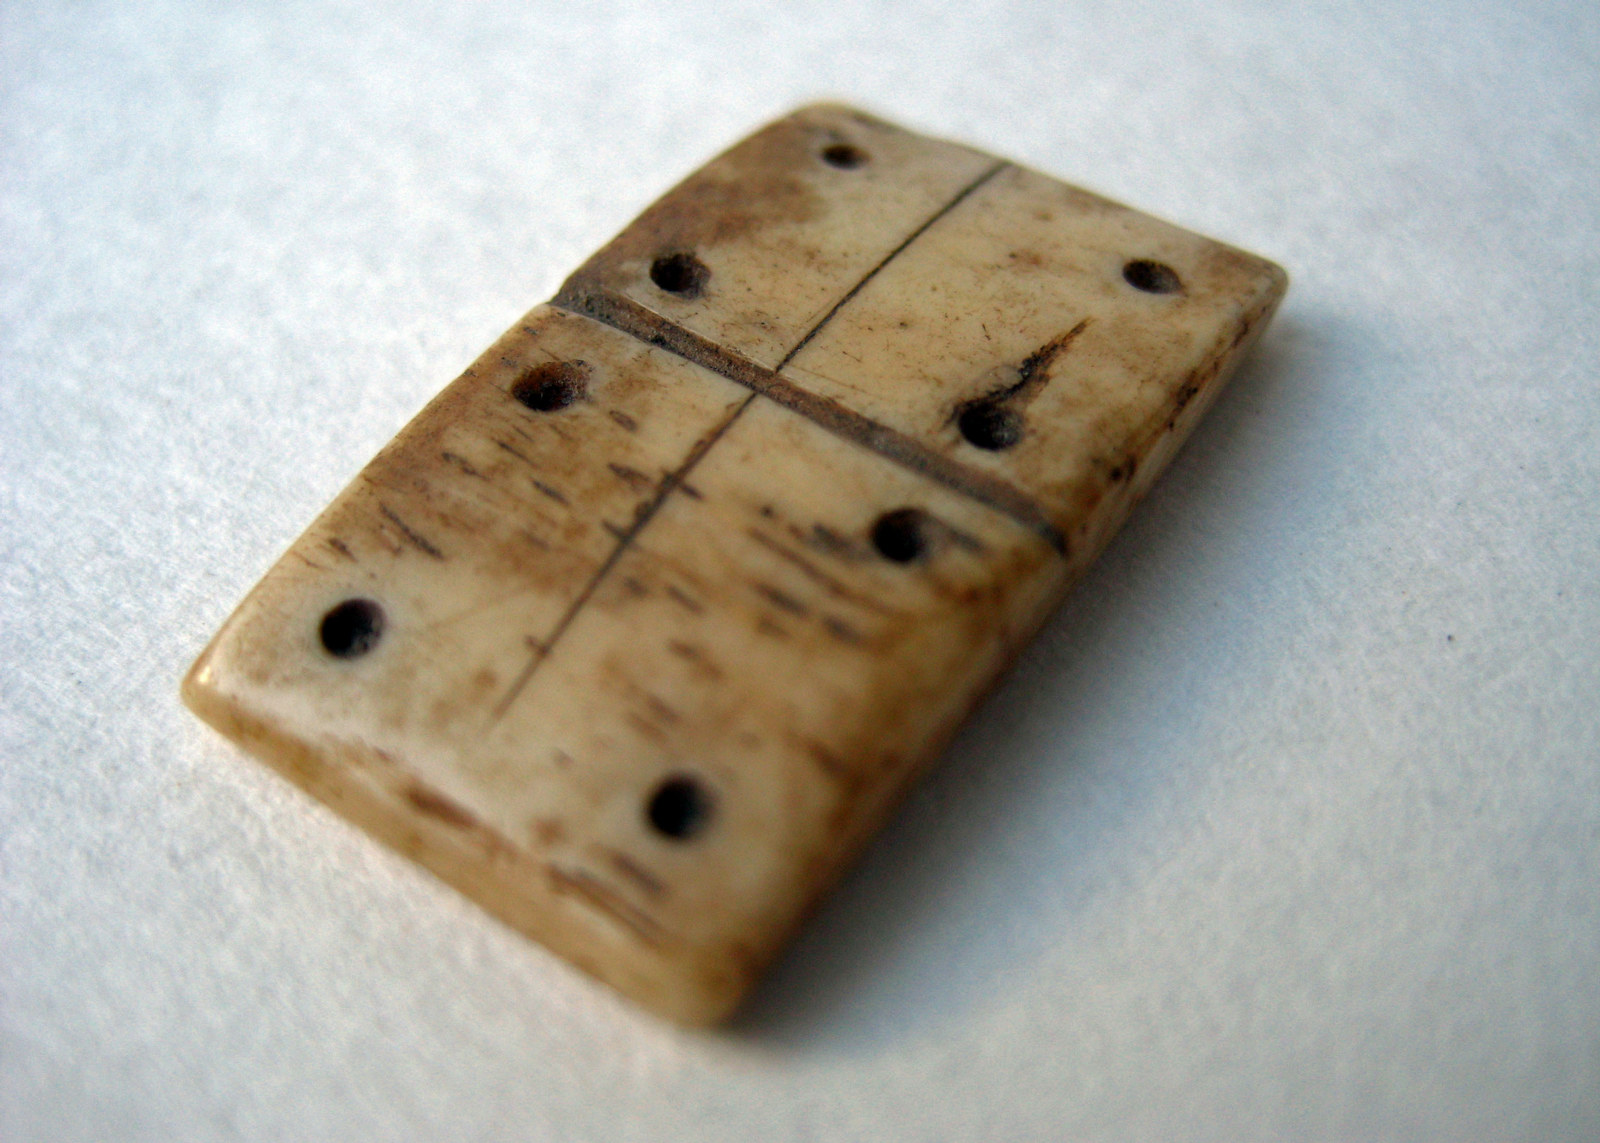 Domino game piece carved from bone showing double 4 dots on white background